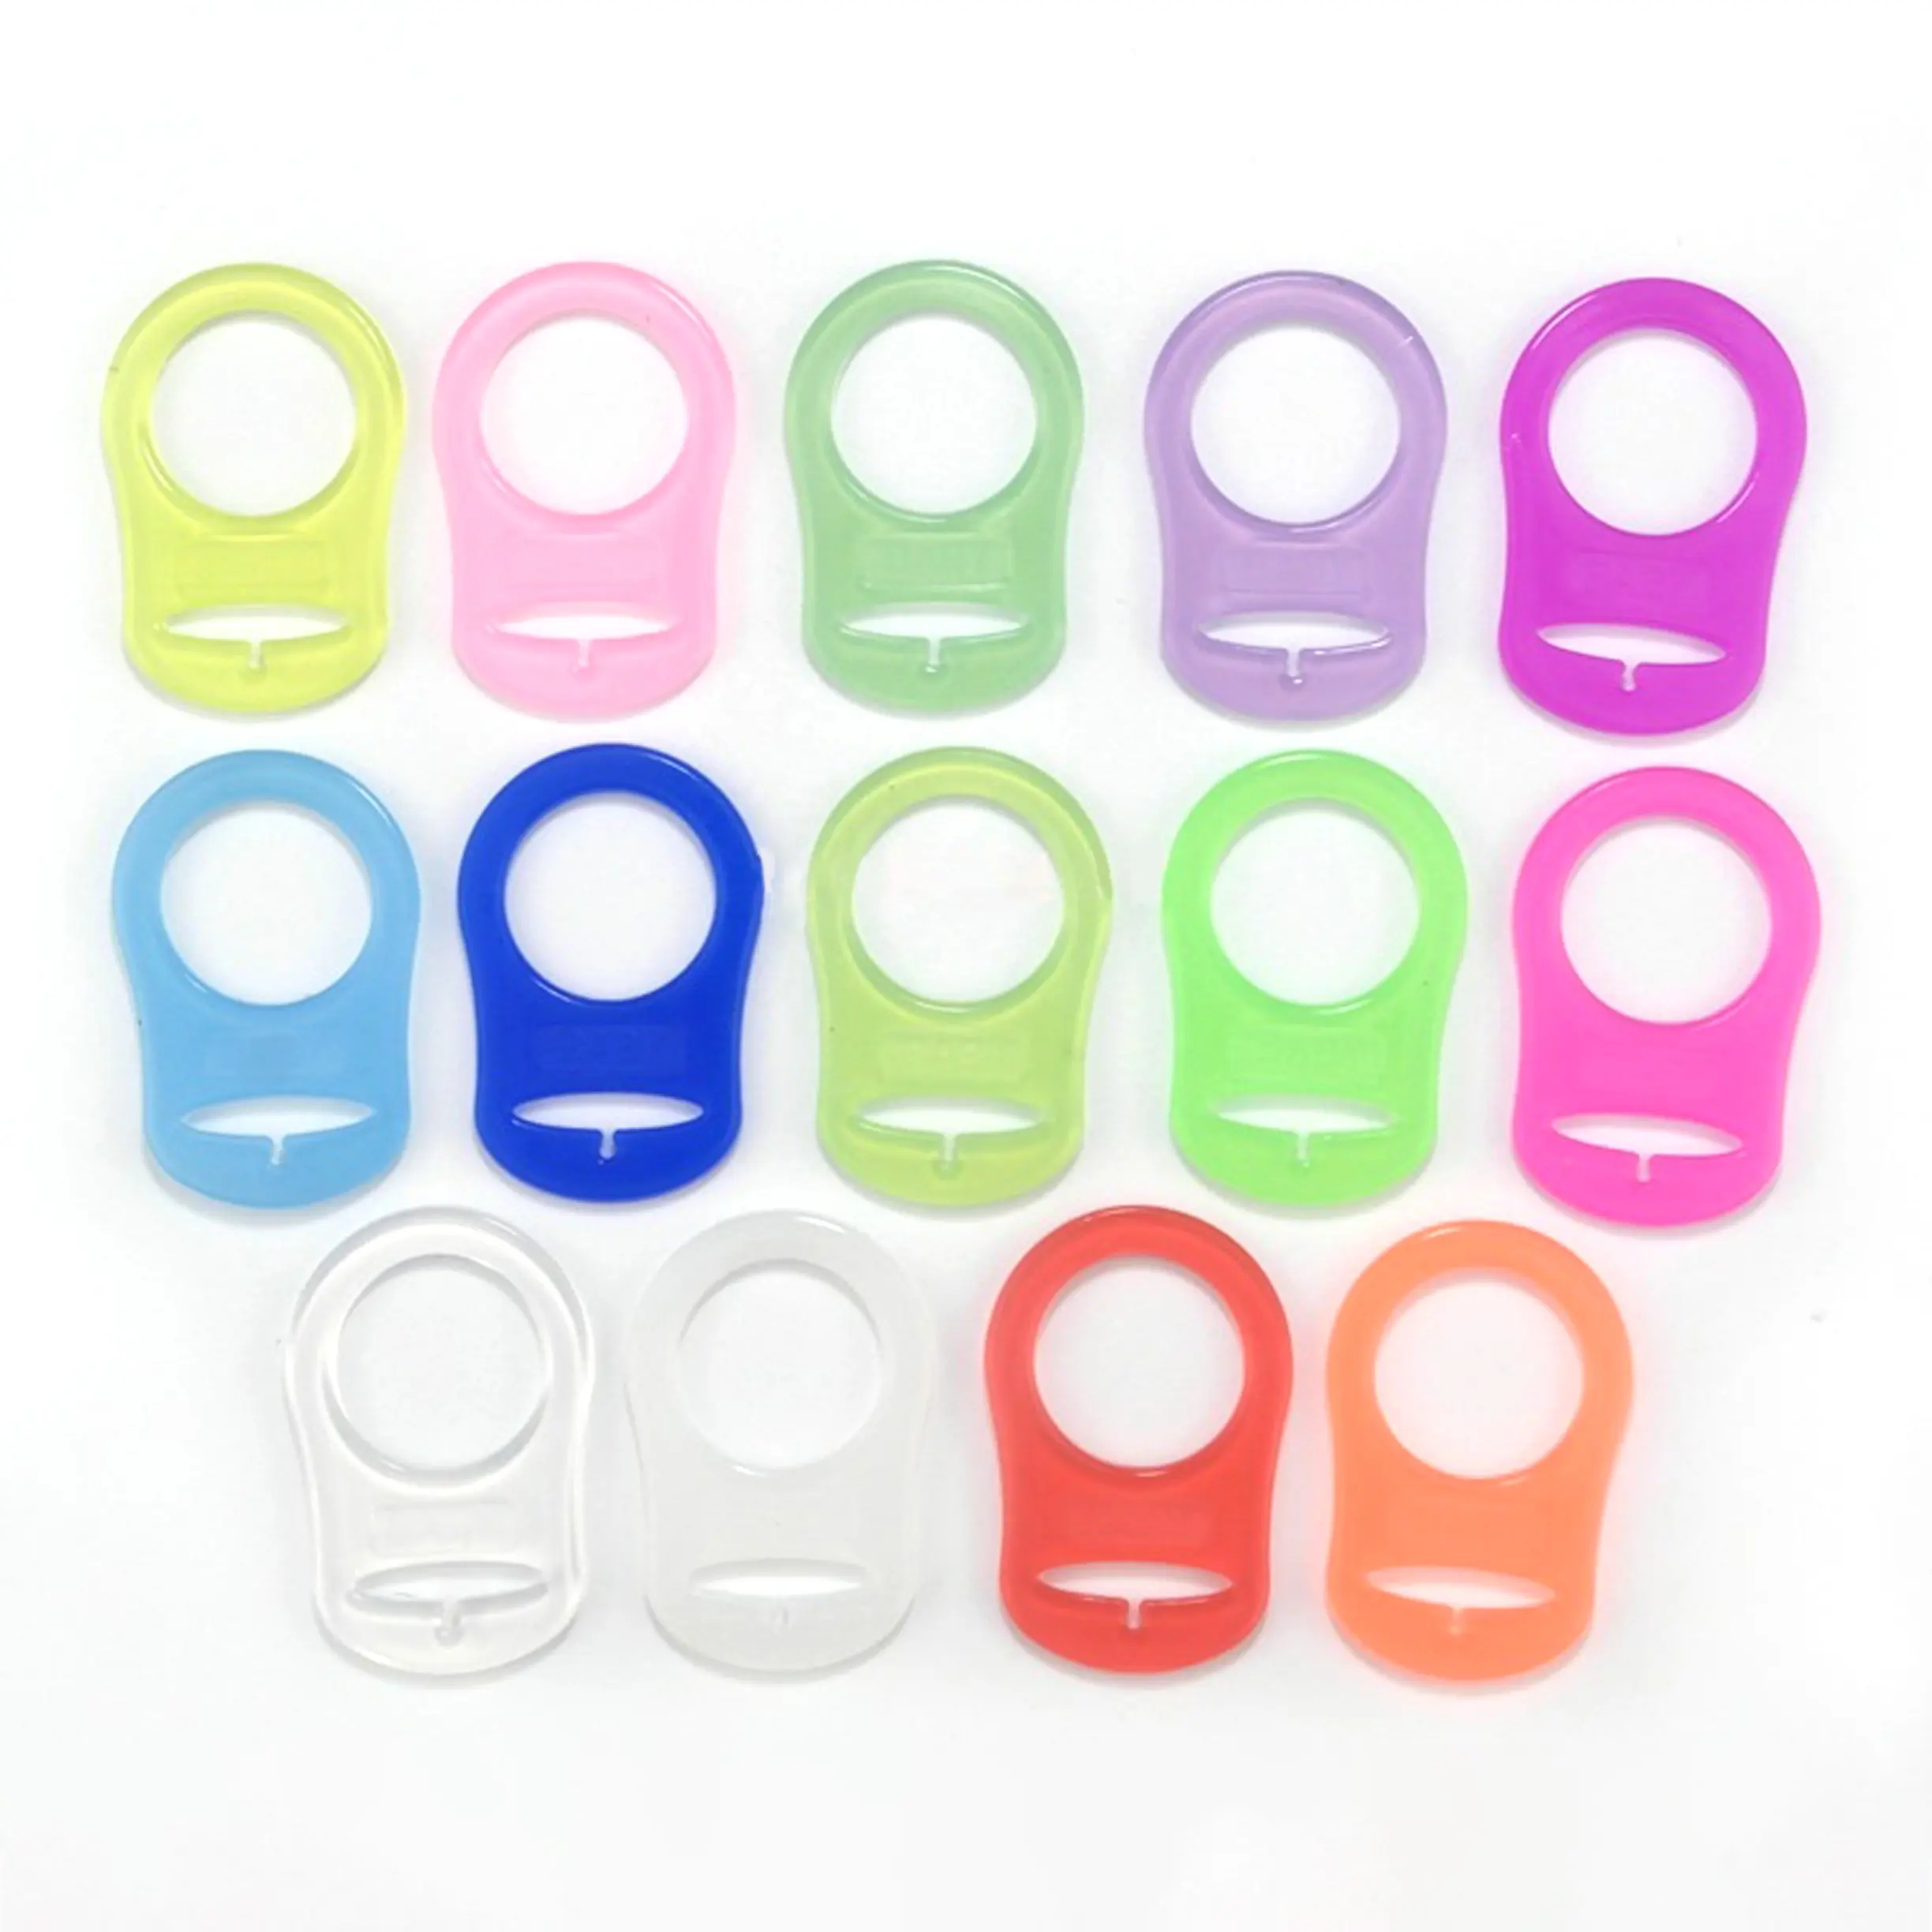 Silicone Adapter Rings Holder for Button Style MAM Nuk Baby Pacifier Soother Teething Ribbon